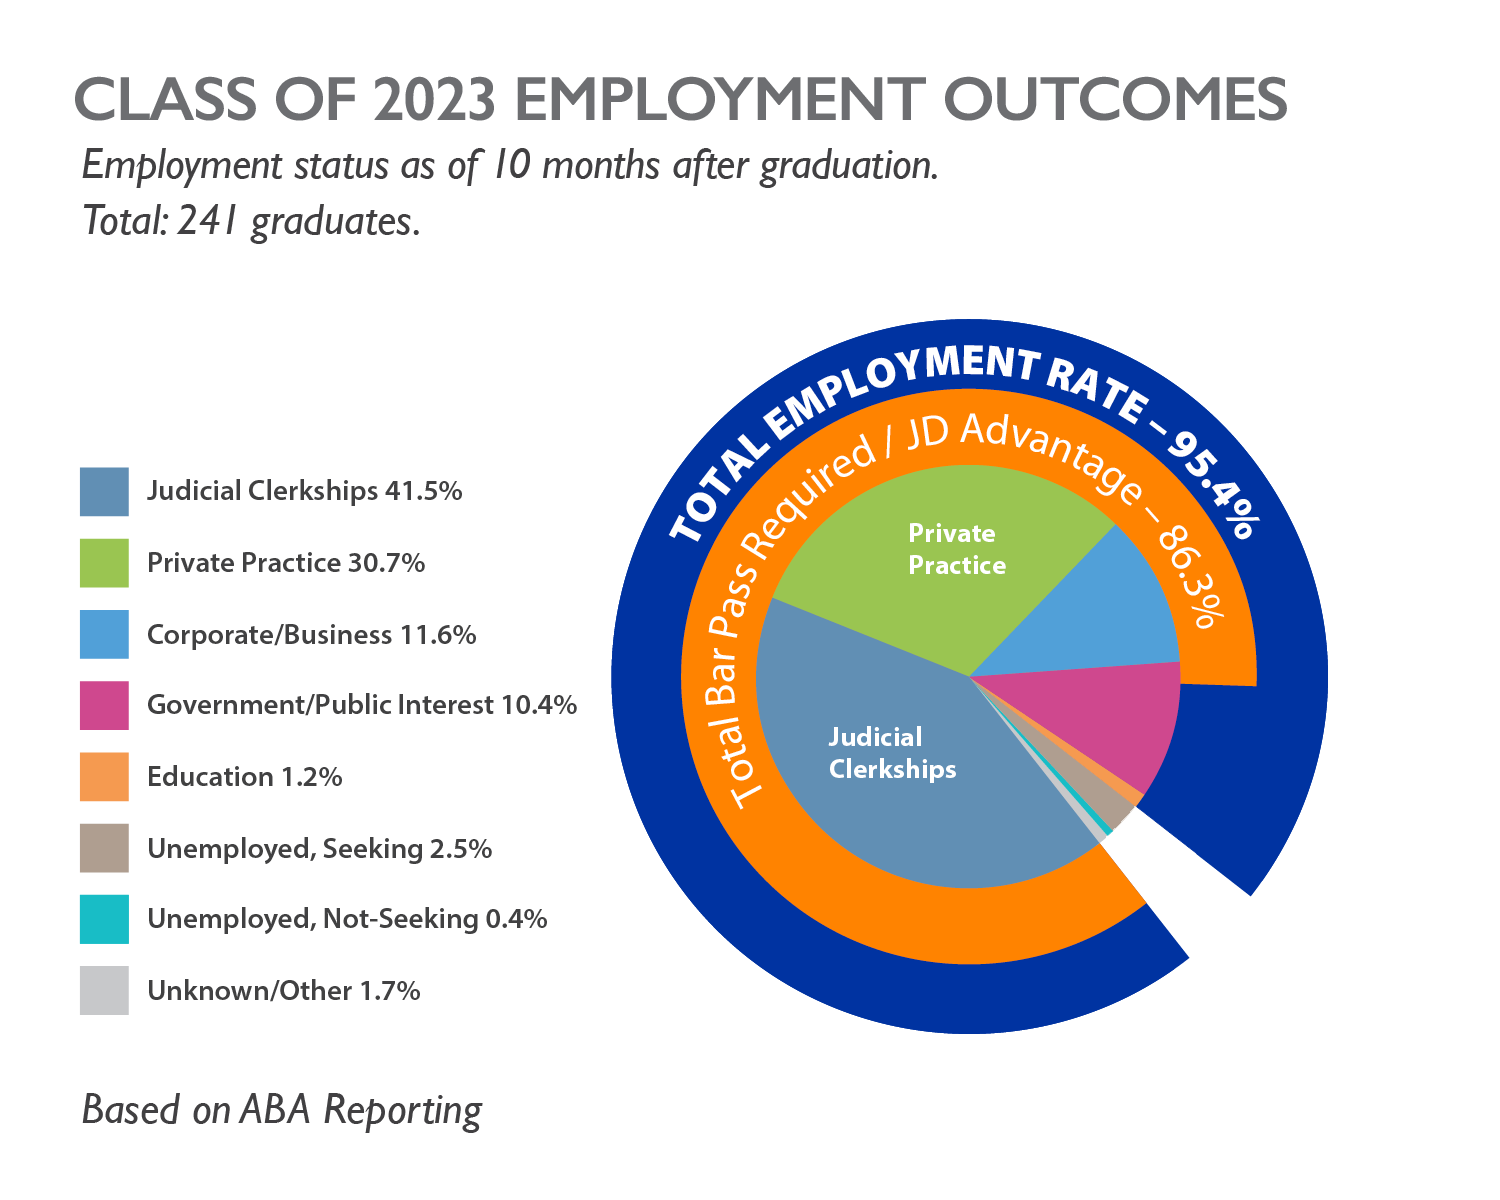 Employment Status for Class of 2023 Graduates: Total employment rate for the class of 2023 was 95.4% with a Bar Pass required or J.D. Advantage of 86.3%. Employed students hold positions in Judicial Clerkships (41.5%), Private Practice (30.7%), Corporate or Business (11.6%), Government or Public Interest (10.4%), Education (1.2%), 2.5% unemployed graduates seeking employment, 0.4% unemployed graduates not seeking, and 0.8% unknown. Employment status as of 10 months after graduation.  Total 197 graduates.